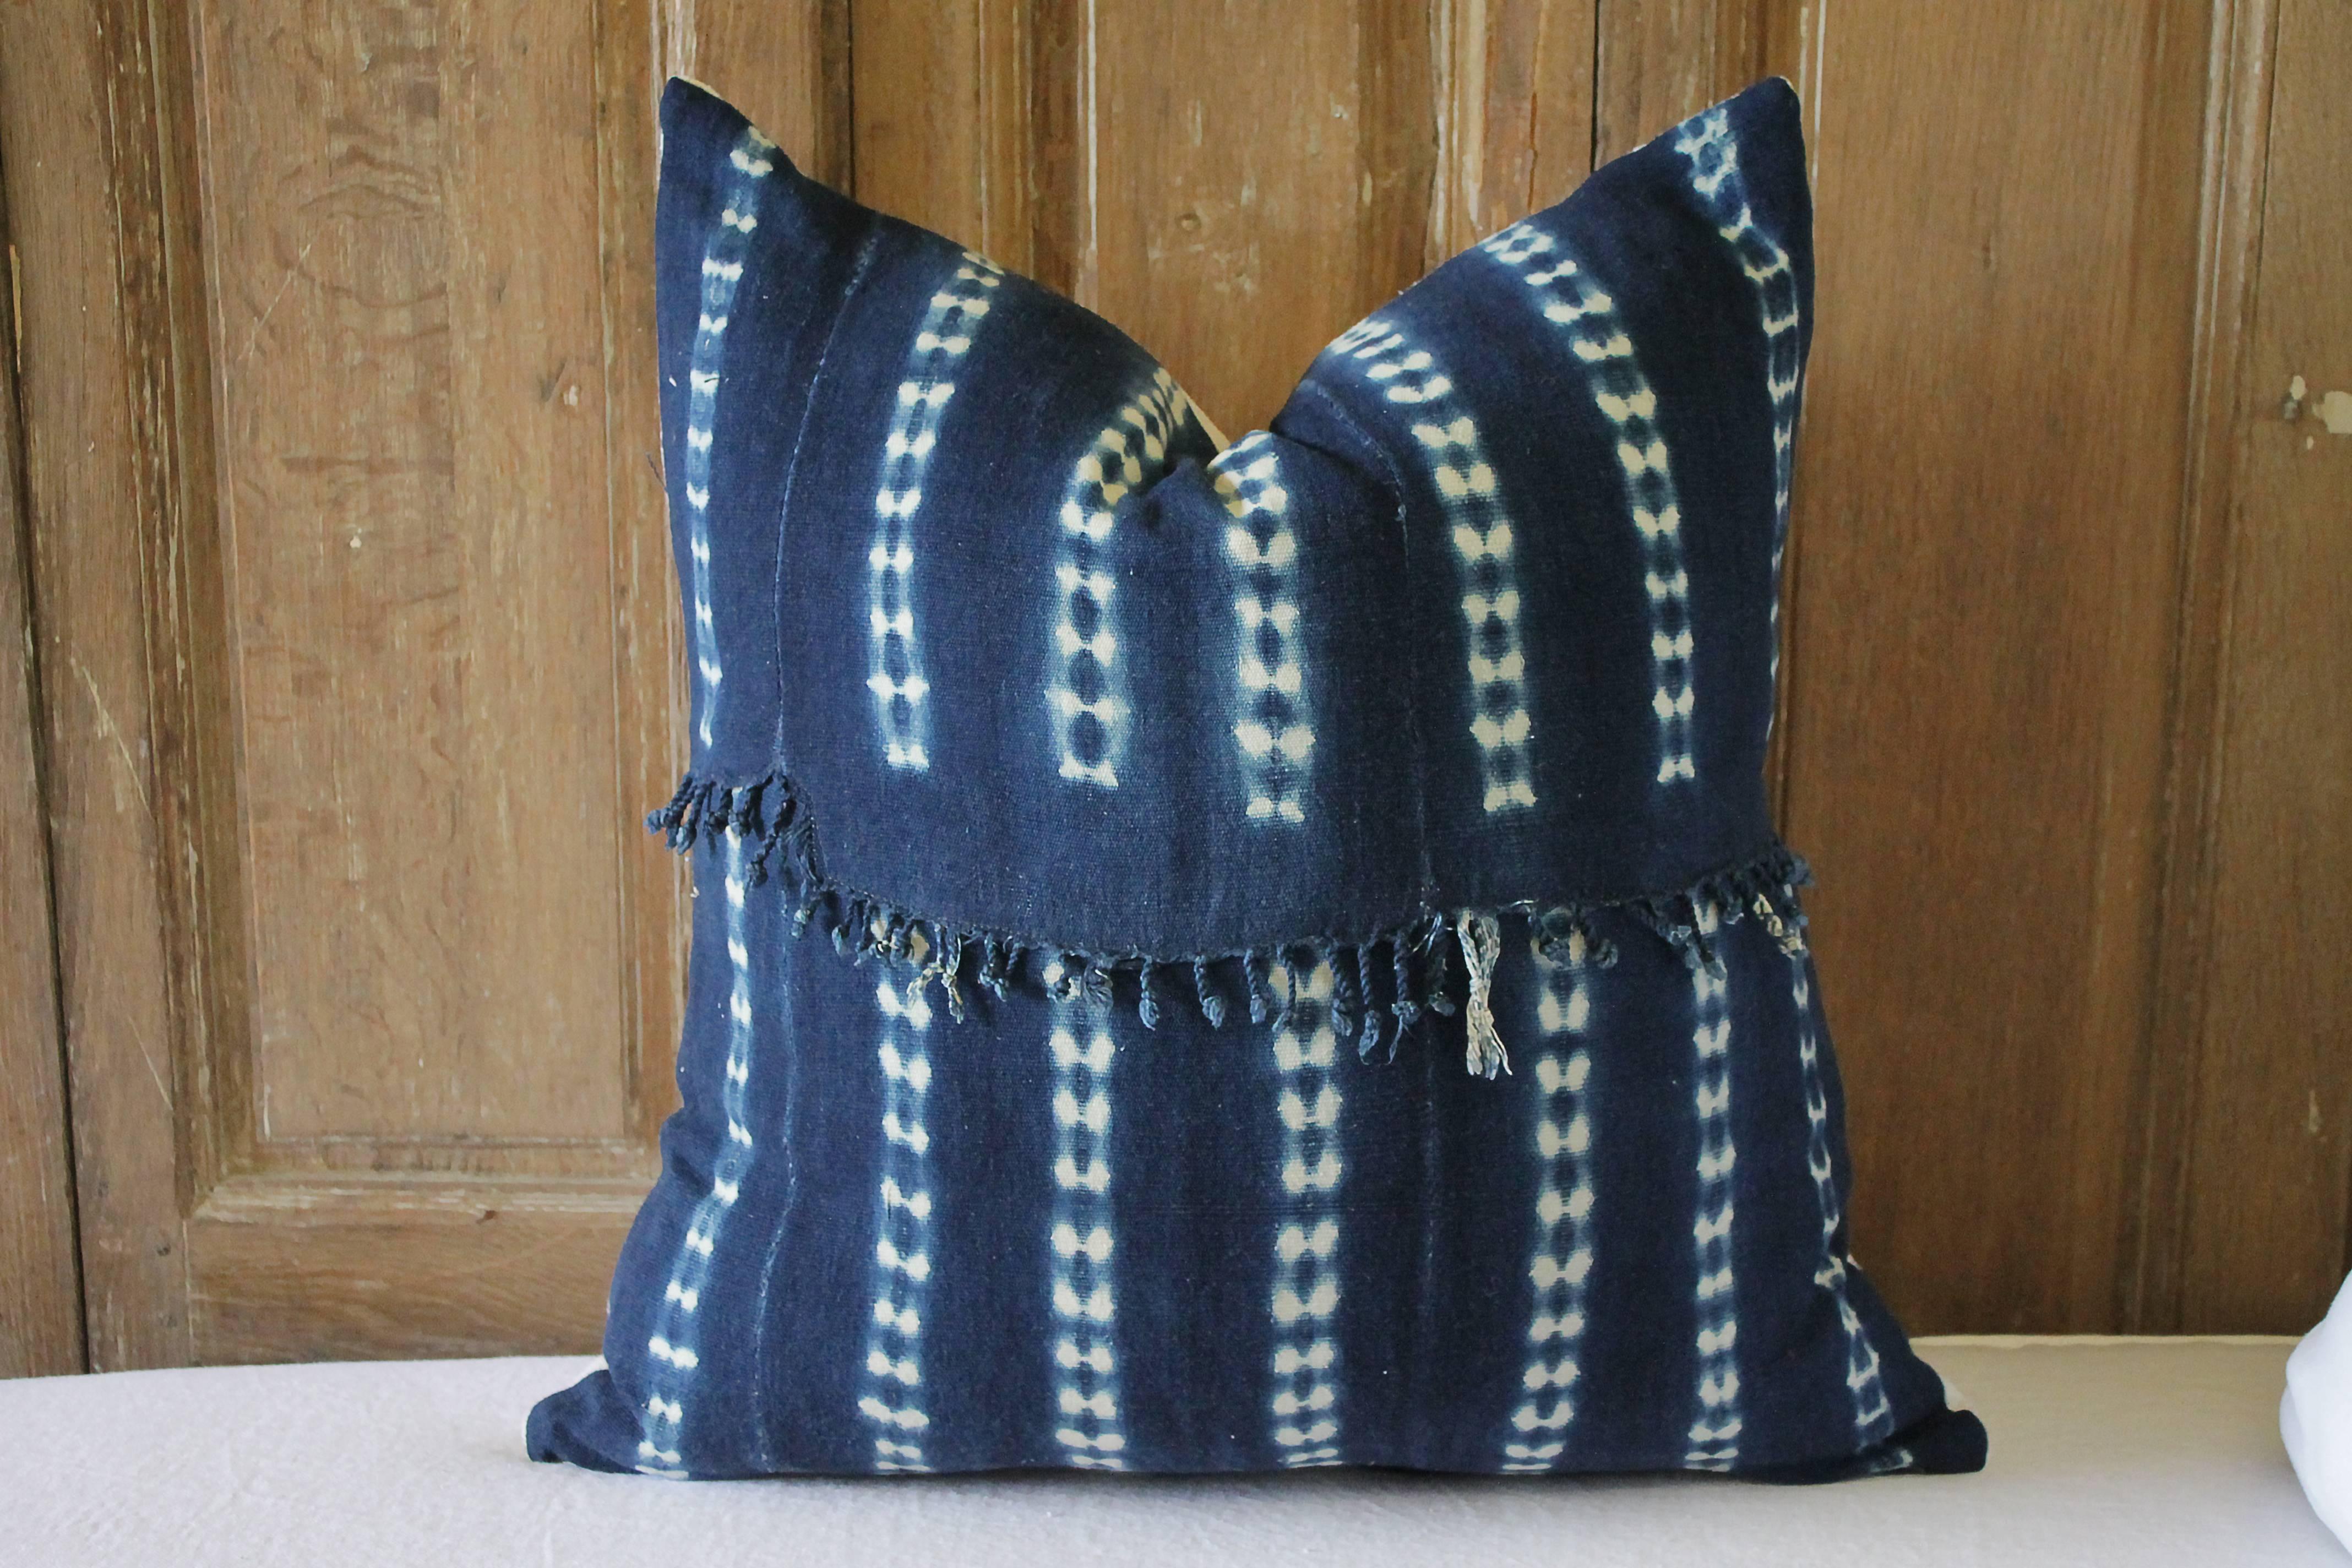 Antique indigo blue Batik accent pillows with fringe.
Custom-made by Full Bloom Cottage, the fronts of the pillows are in an antique Batik fabric with original fringe edge we salvaged from the throw, very soft and nubby, the backside are finished